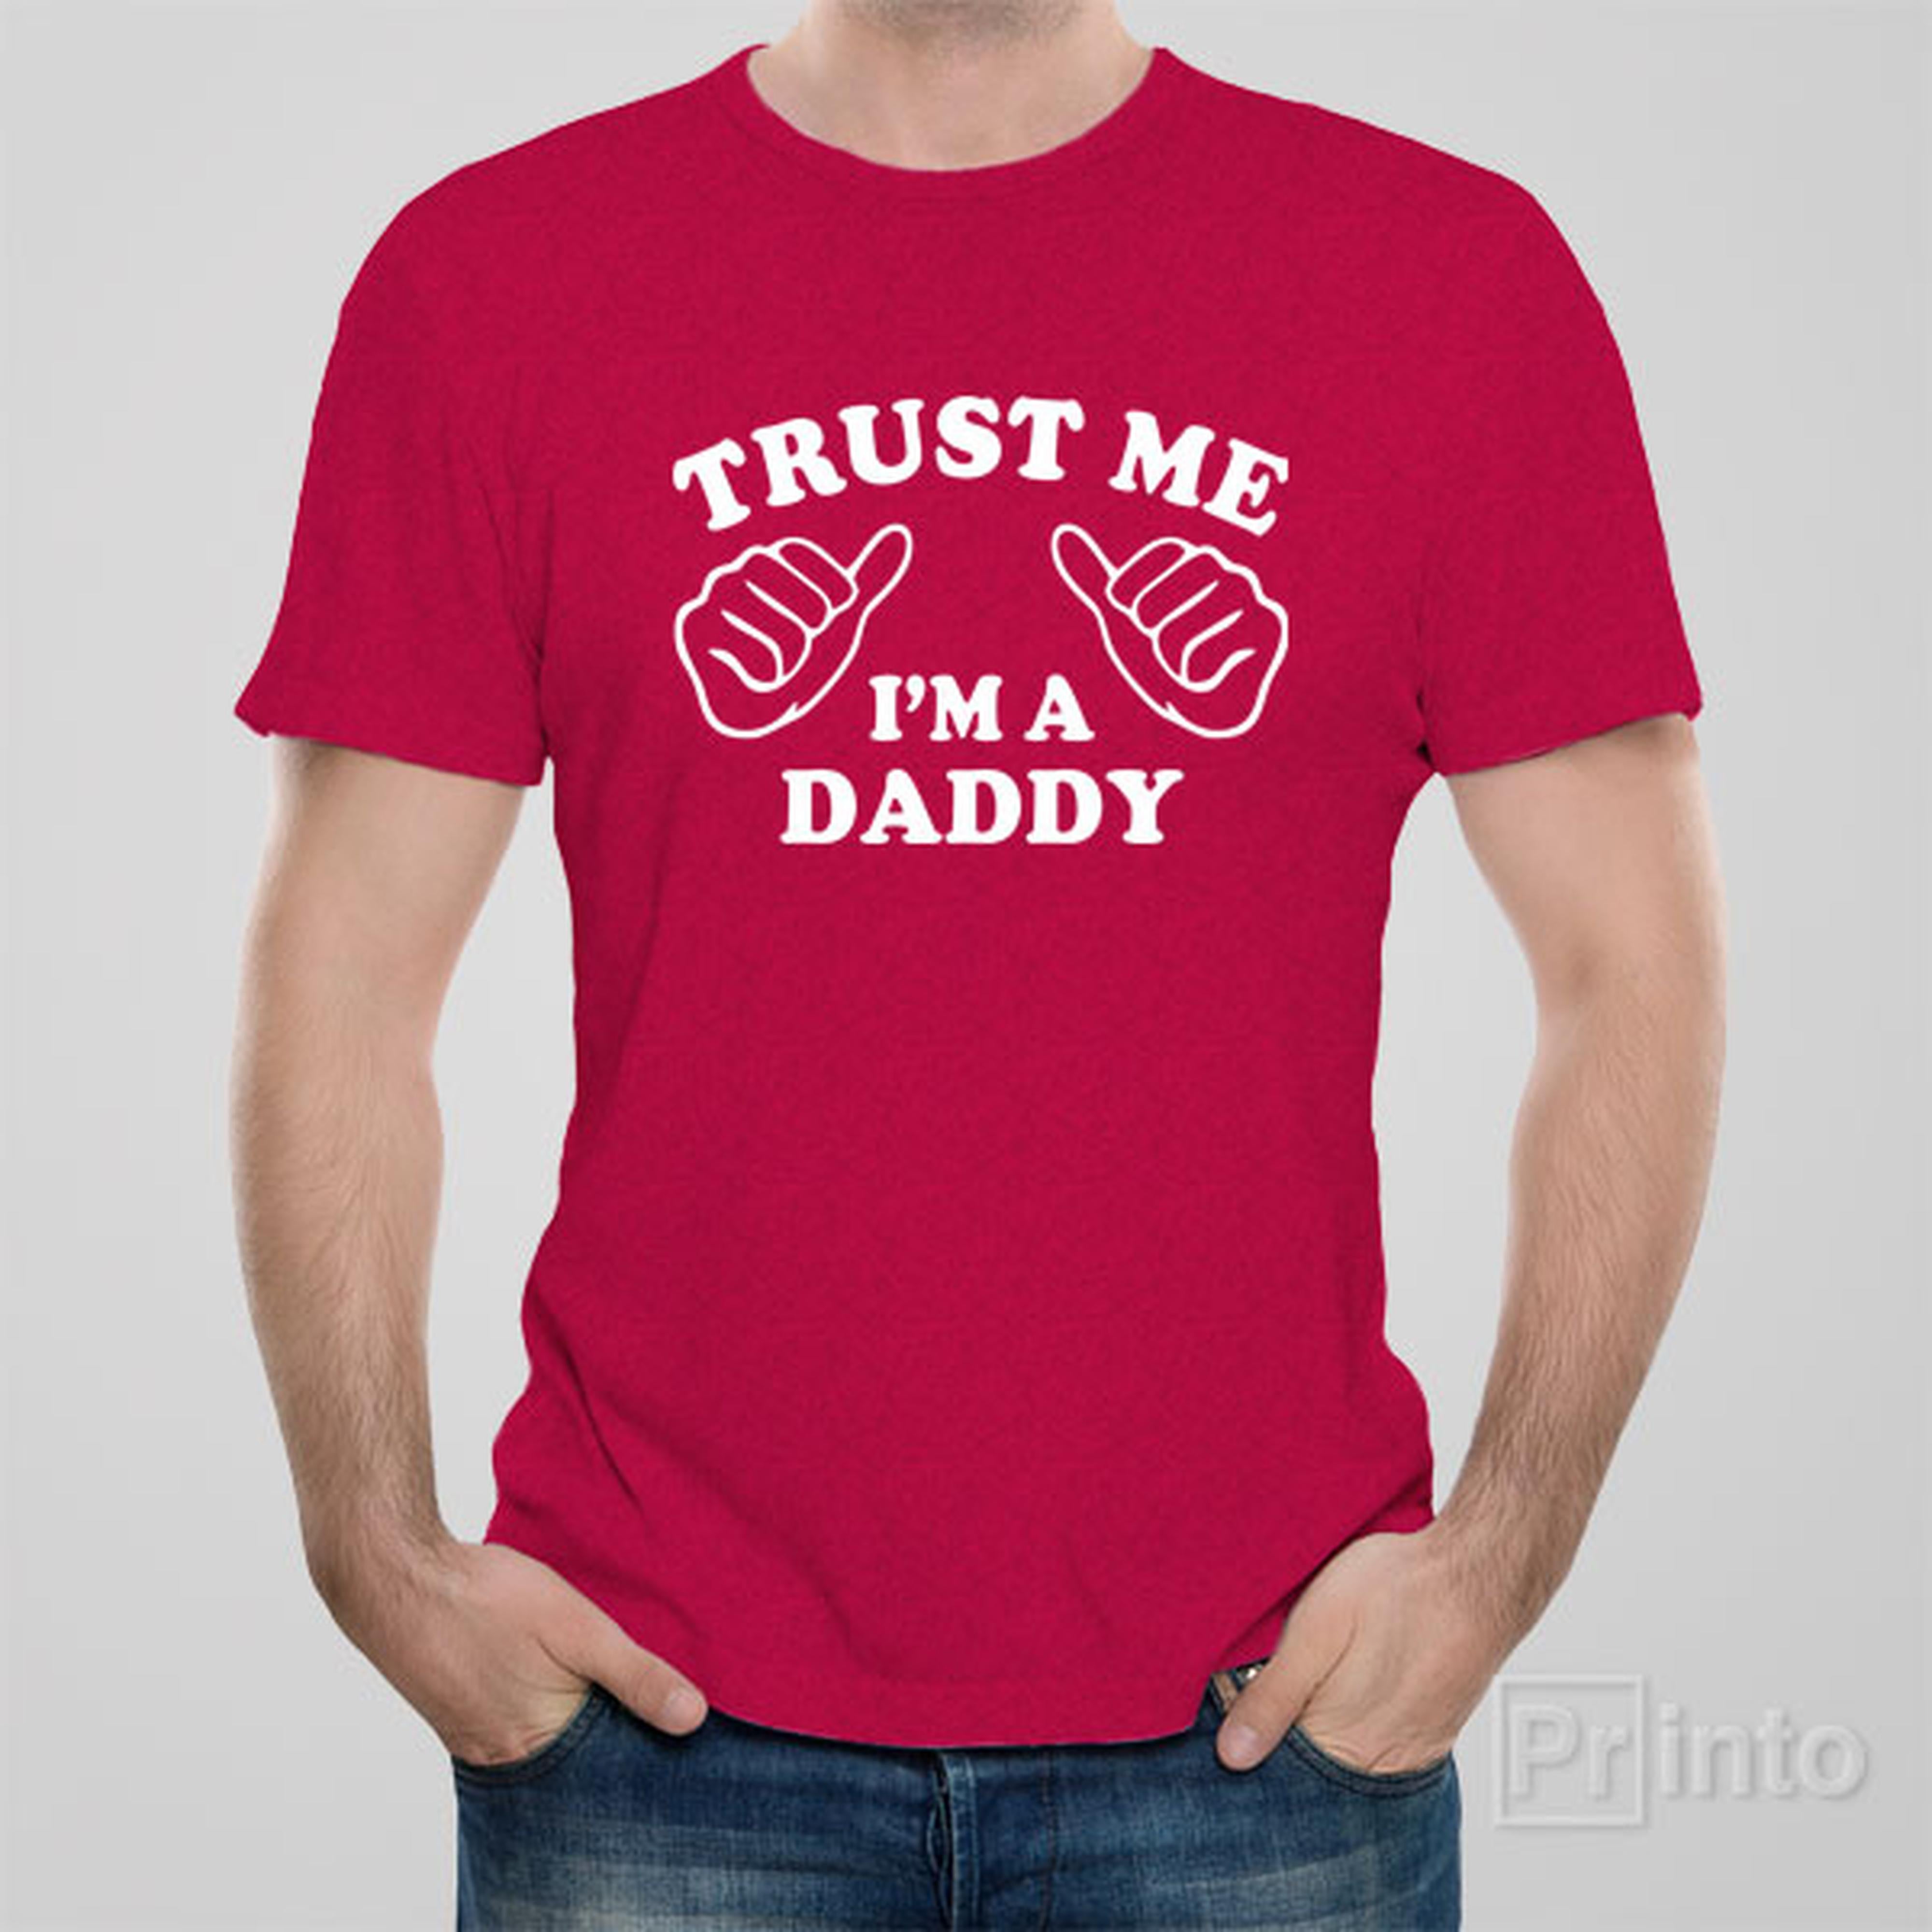 trust-me-i-am-the-daddy-t-shirt